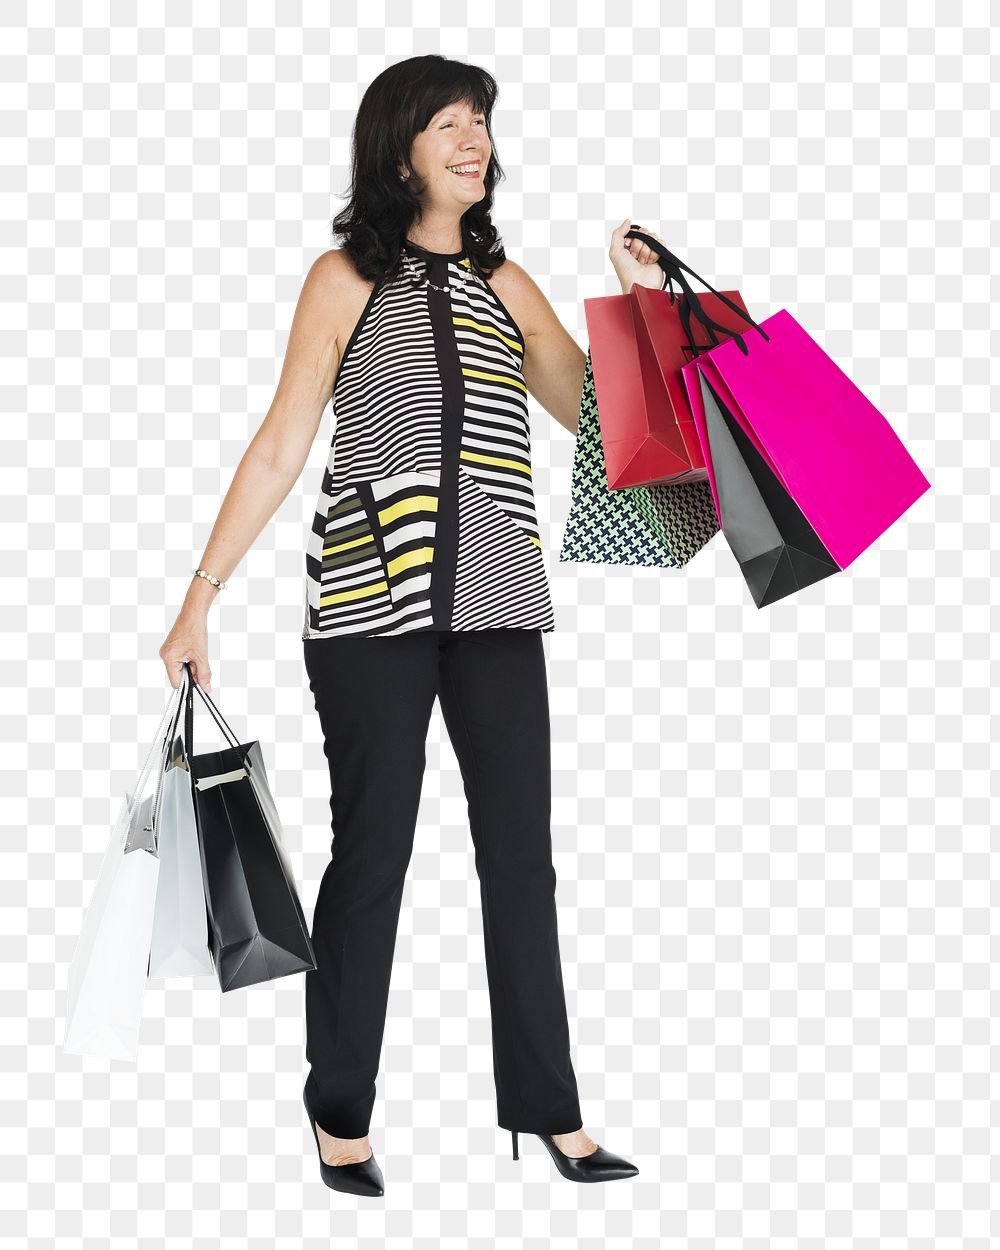 Woman shopping png element, transparent background